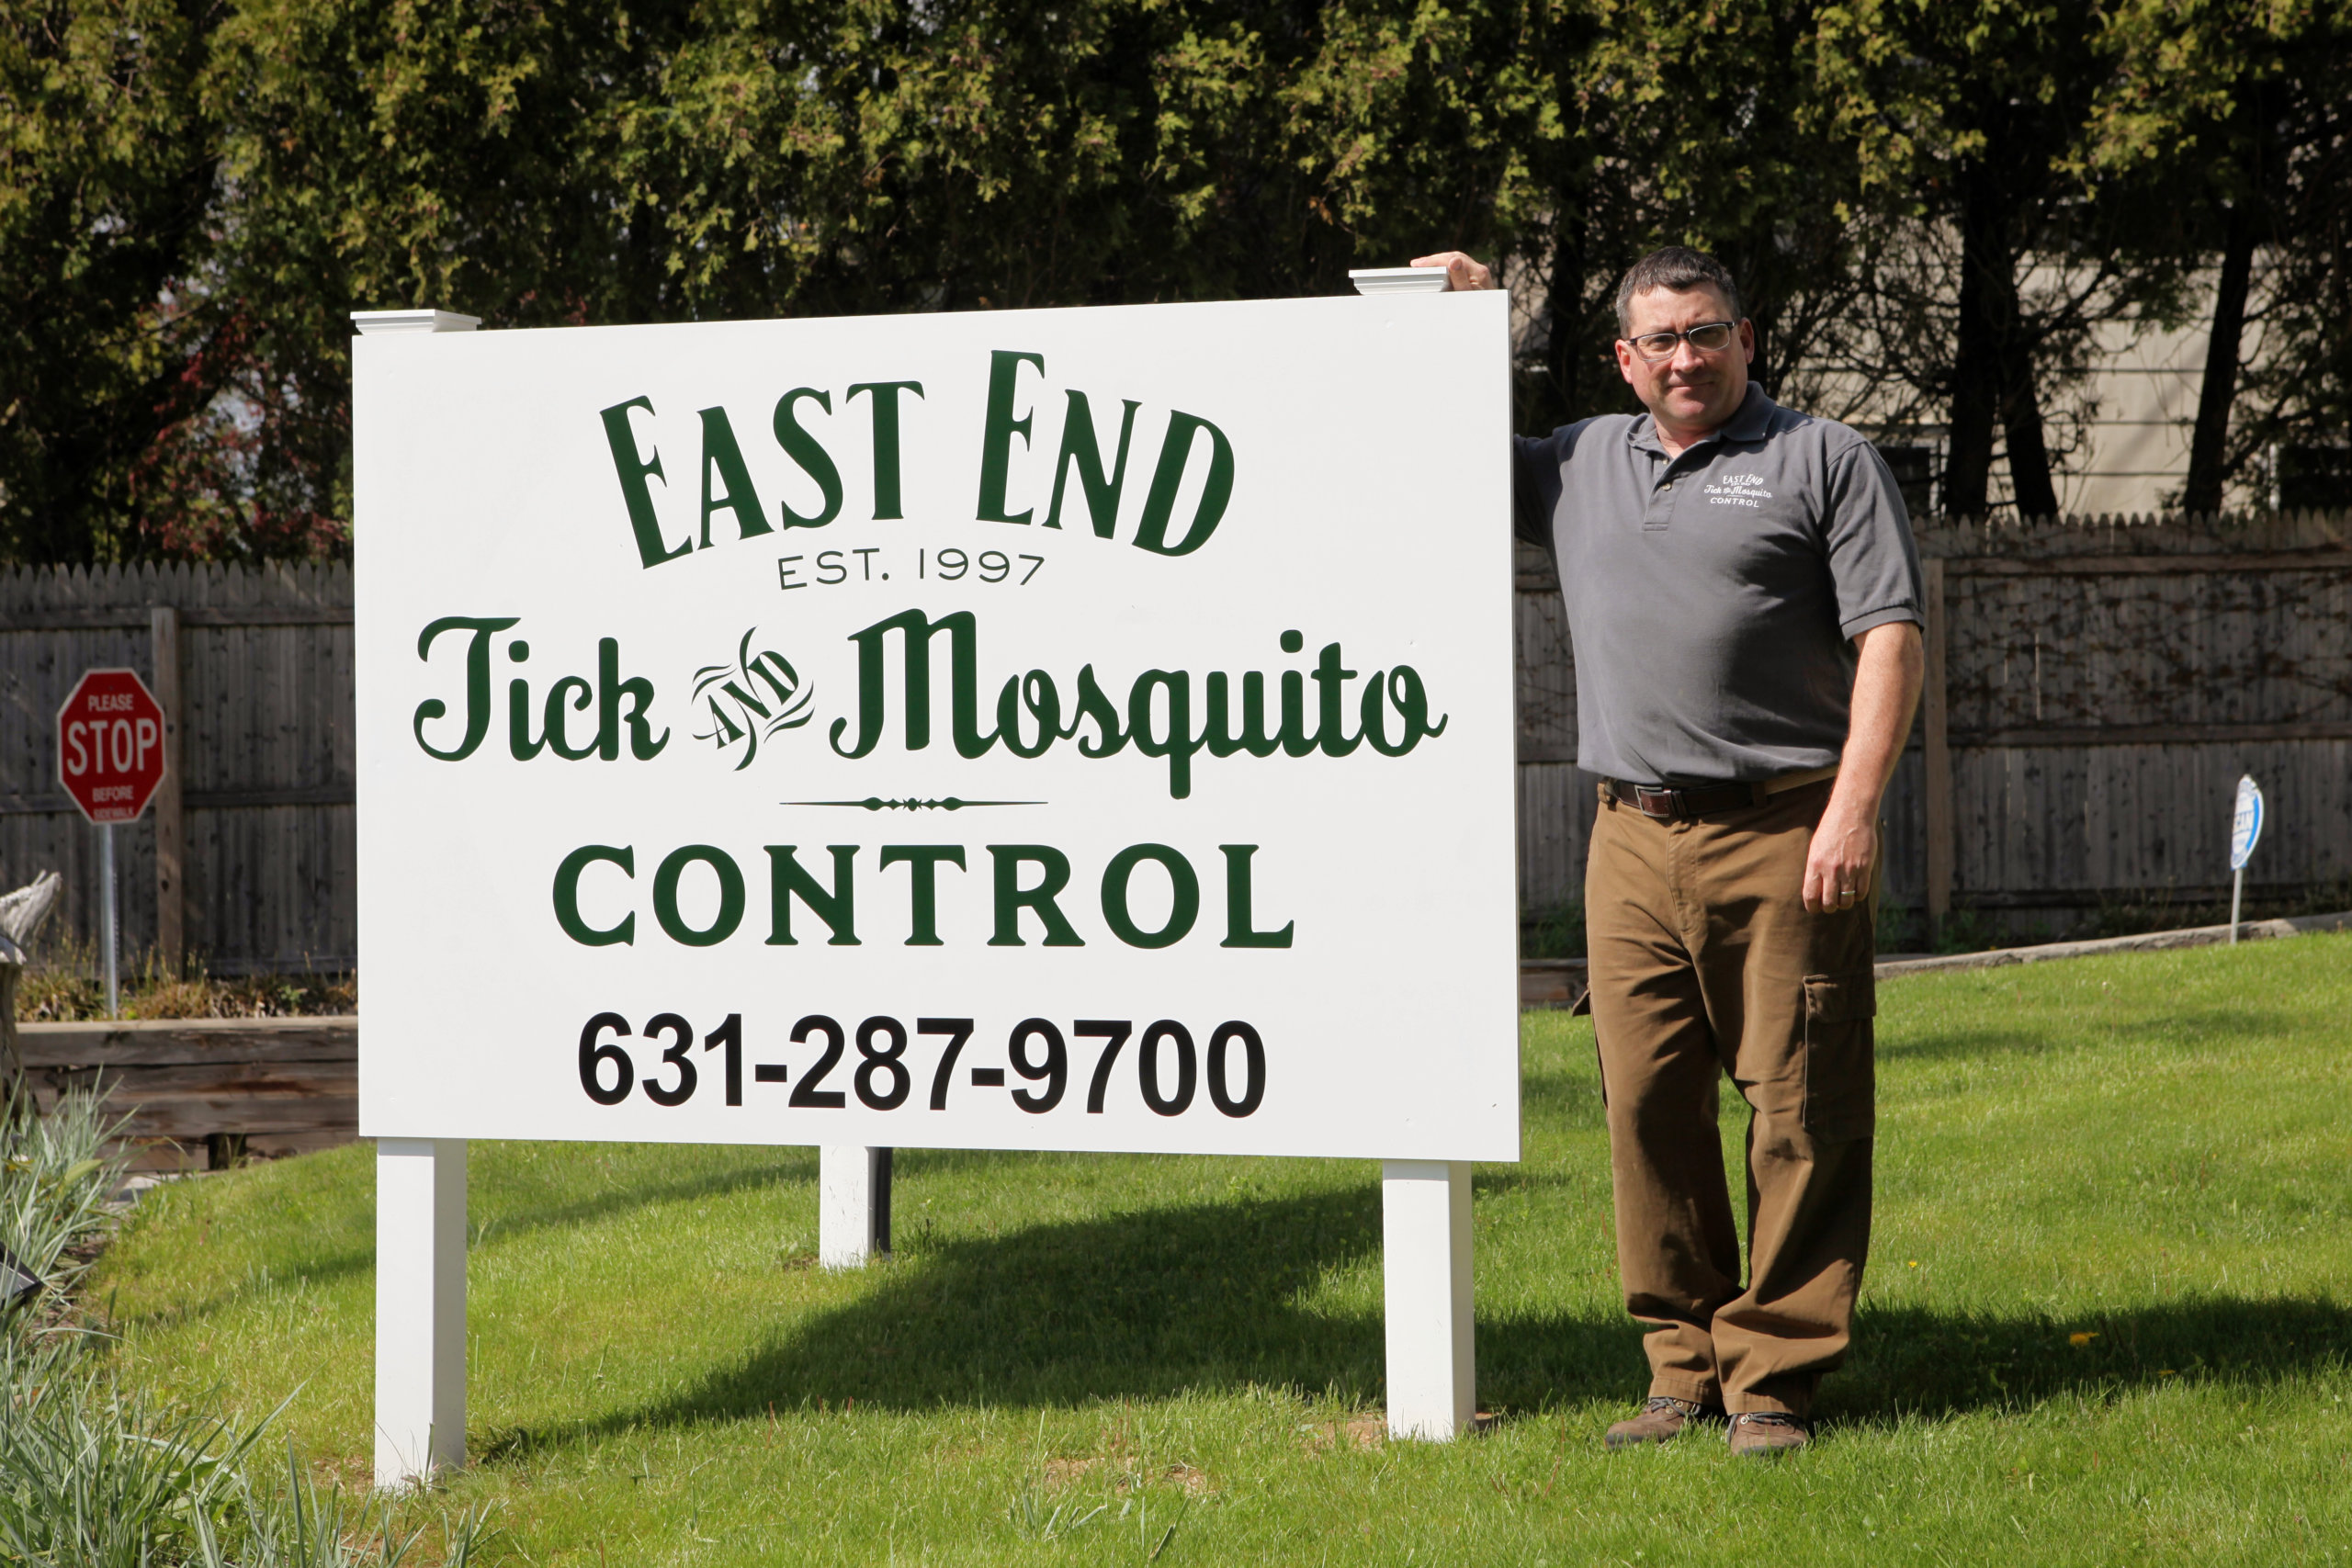 Brian Kelly of East End Tick & Mosquito Control